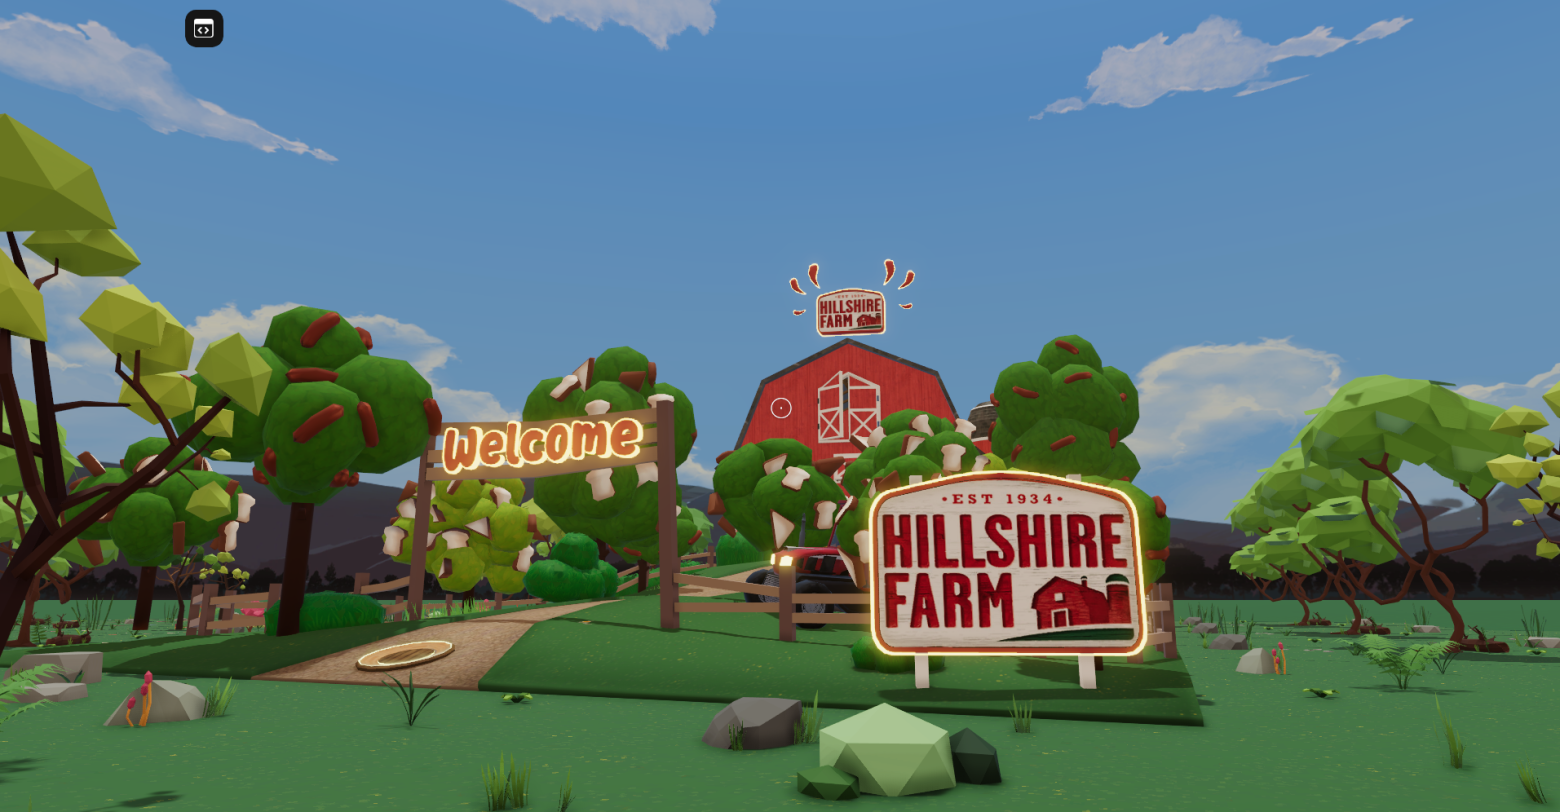 This is a photo of the Iconic Red Barn from Hillshire Farm.